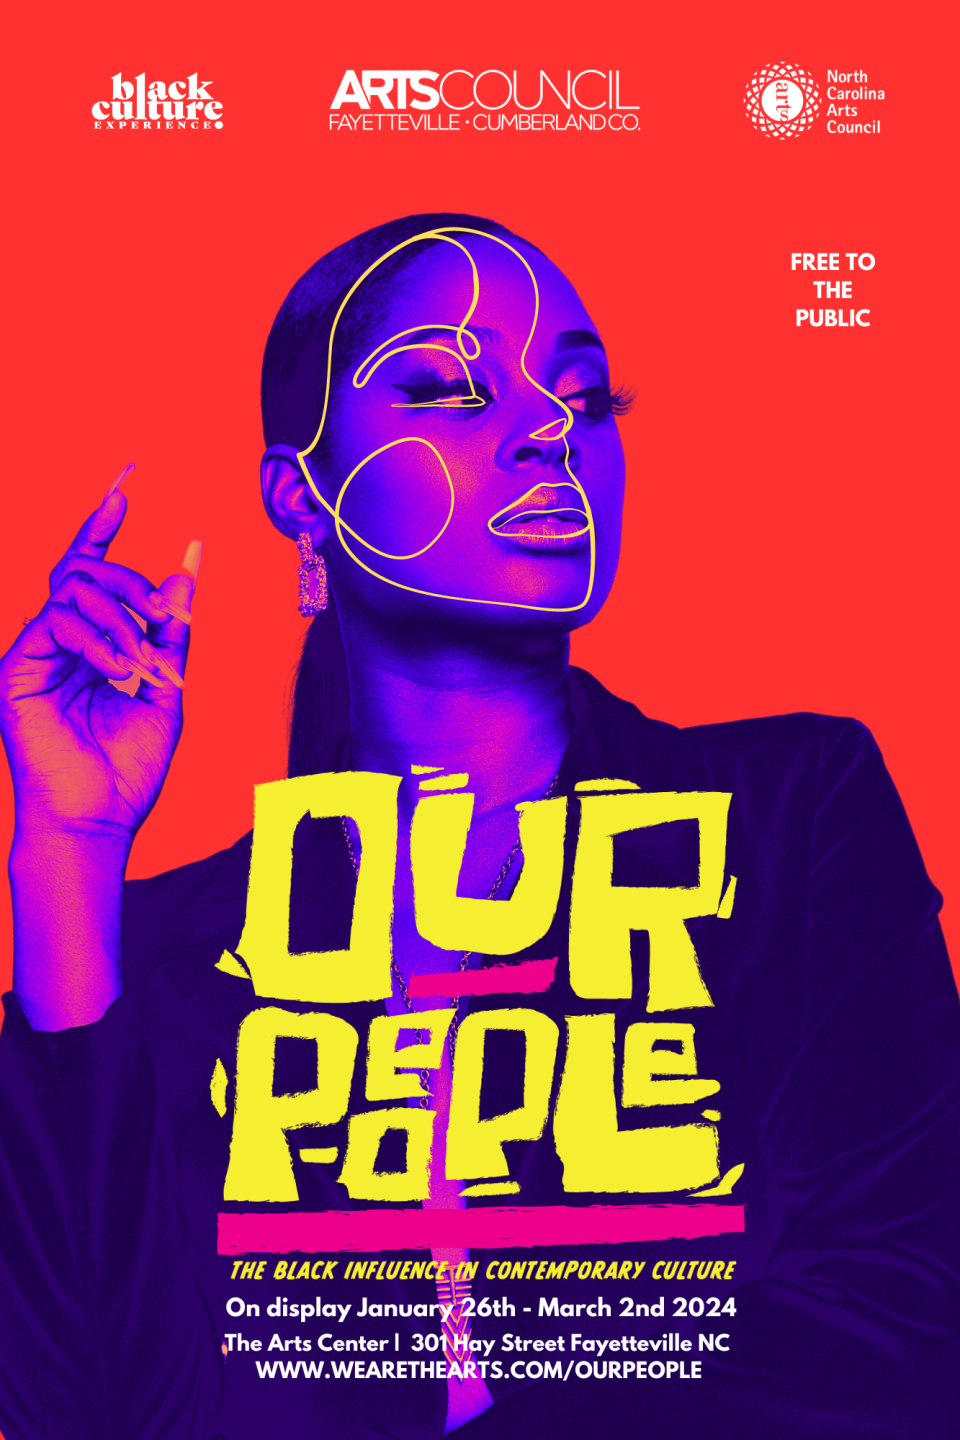 Artists are encouraged to submit works that capture the Black experience for a juried show in February, called “Our People”: The Black Influence in Contemporary Culture.” The Arts Council of Fayetteville/Cumberland County is sponsoring the exhibition.